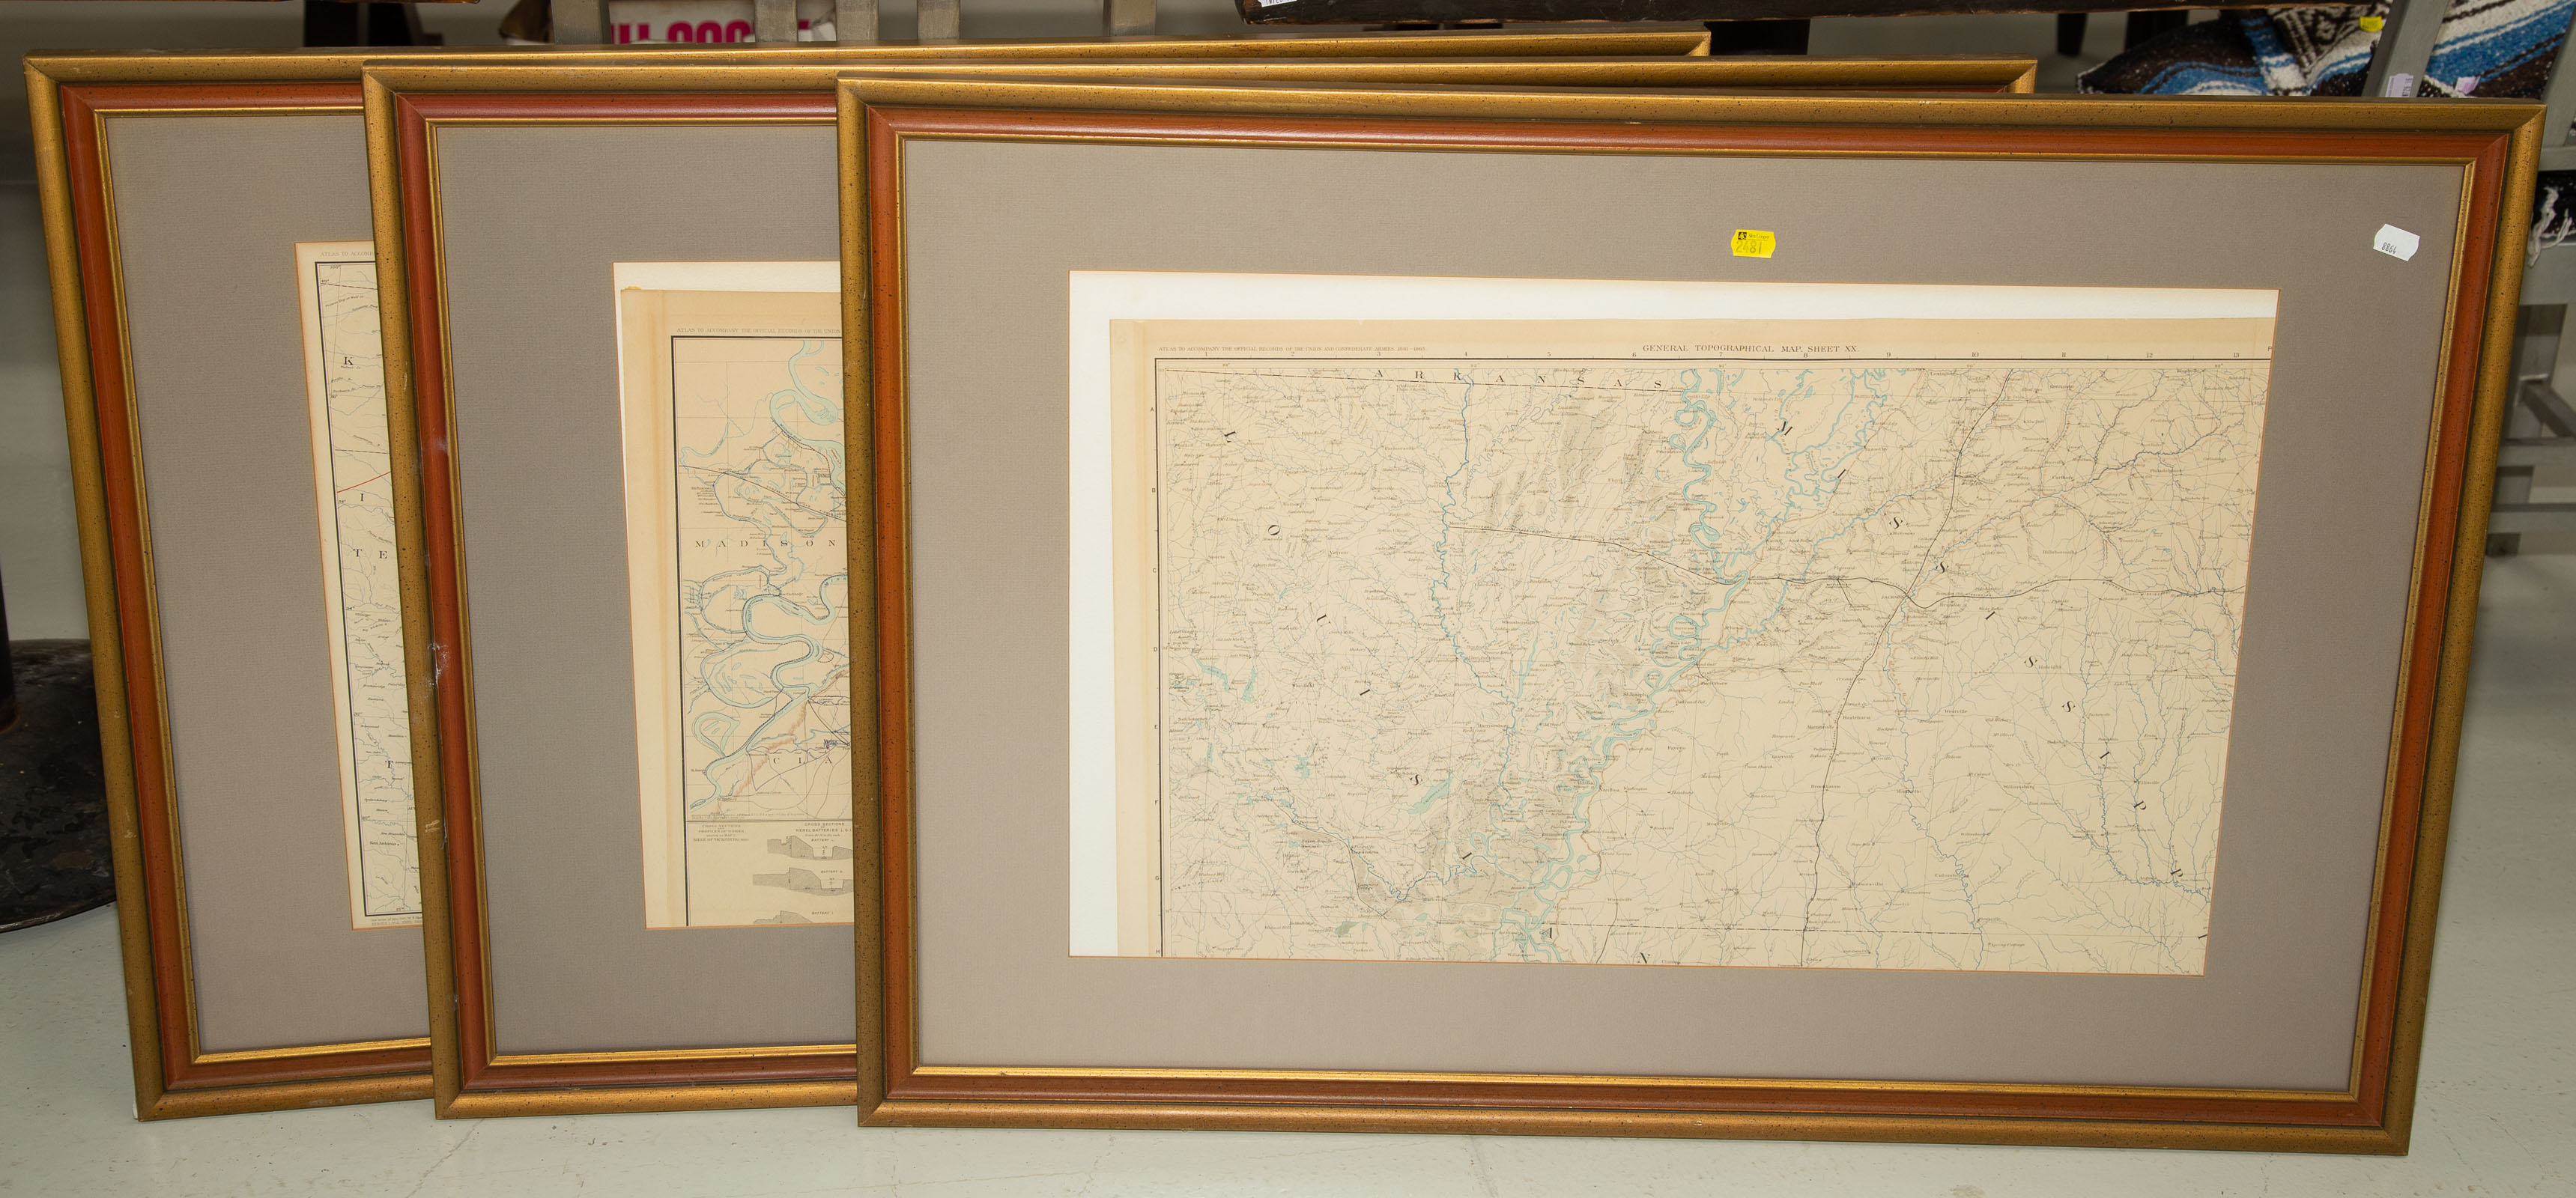 THREE FRAMED MAPS Includes showing 337c92